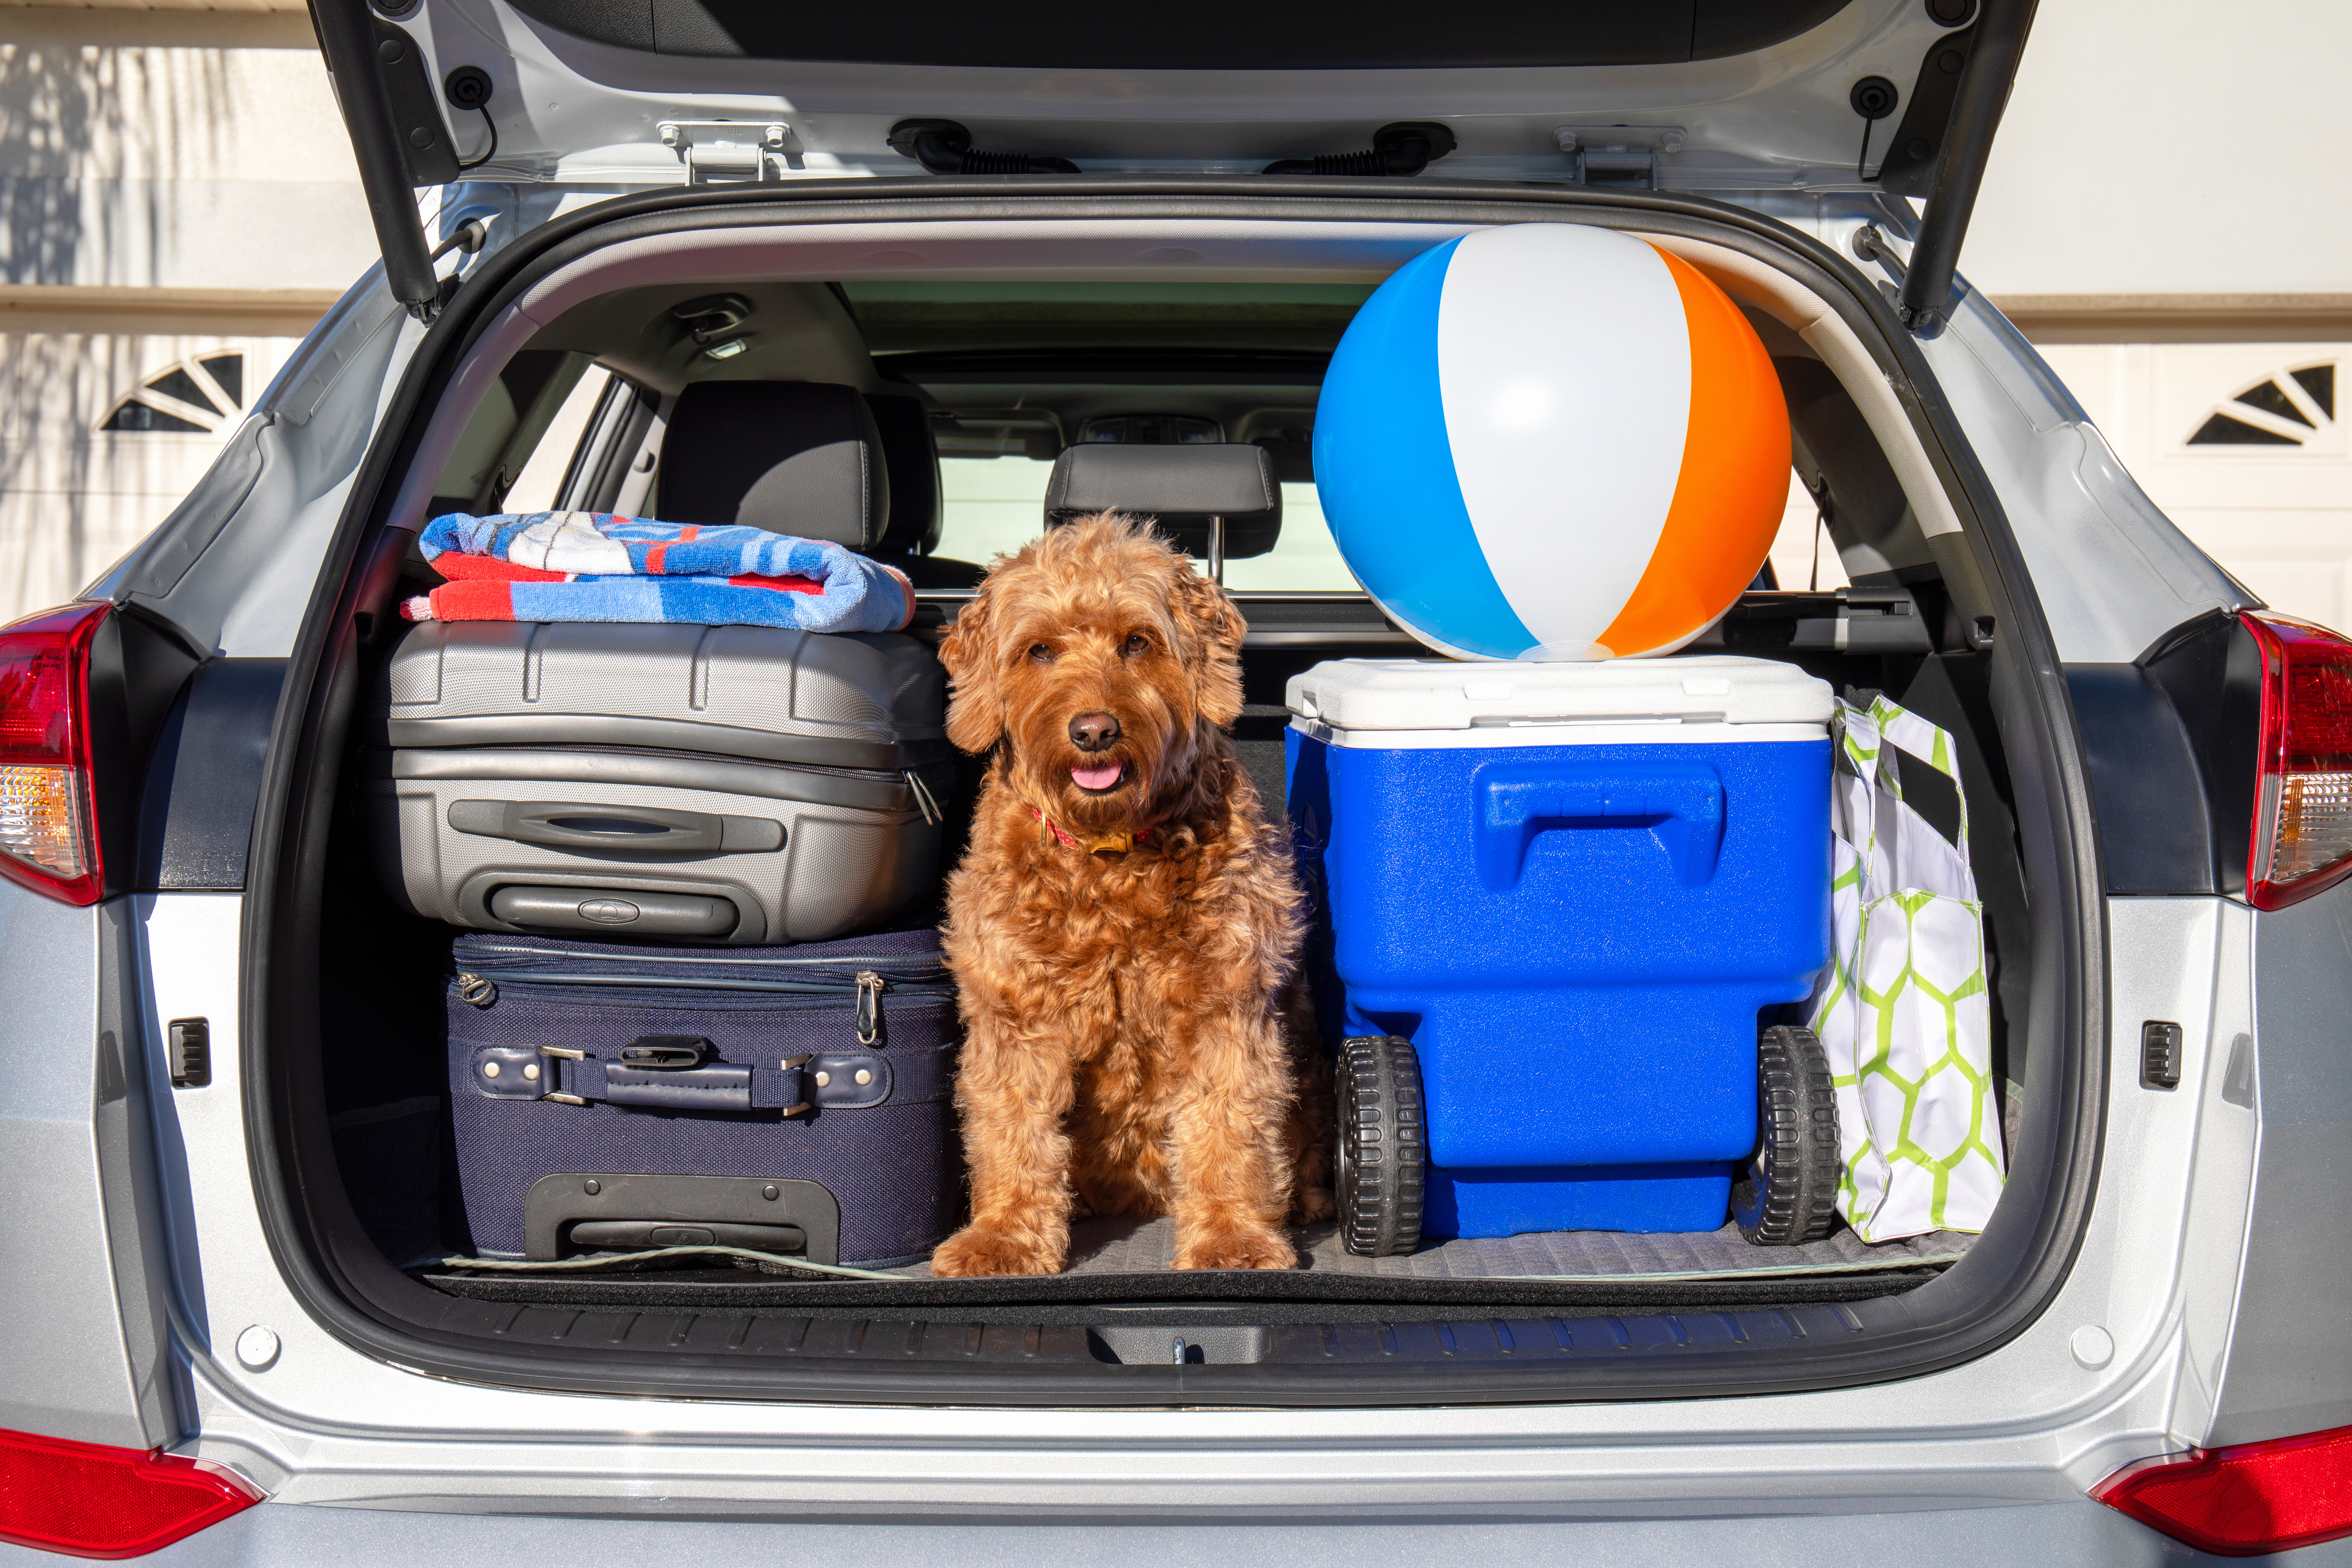 Essential Tips for Preparing Your Vehicle for an Unforgettable Summer Road Trip